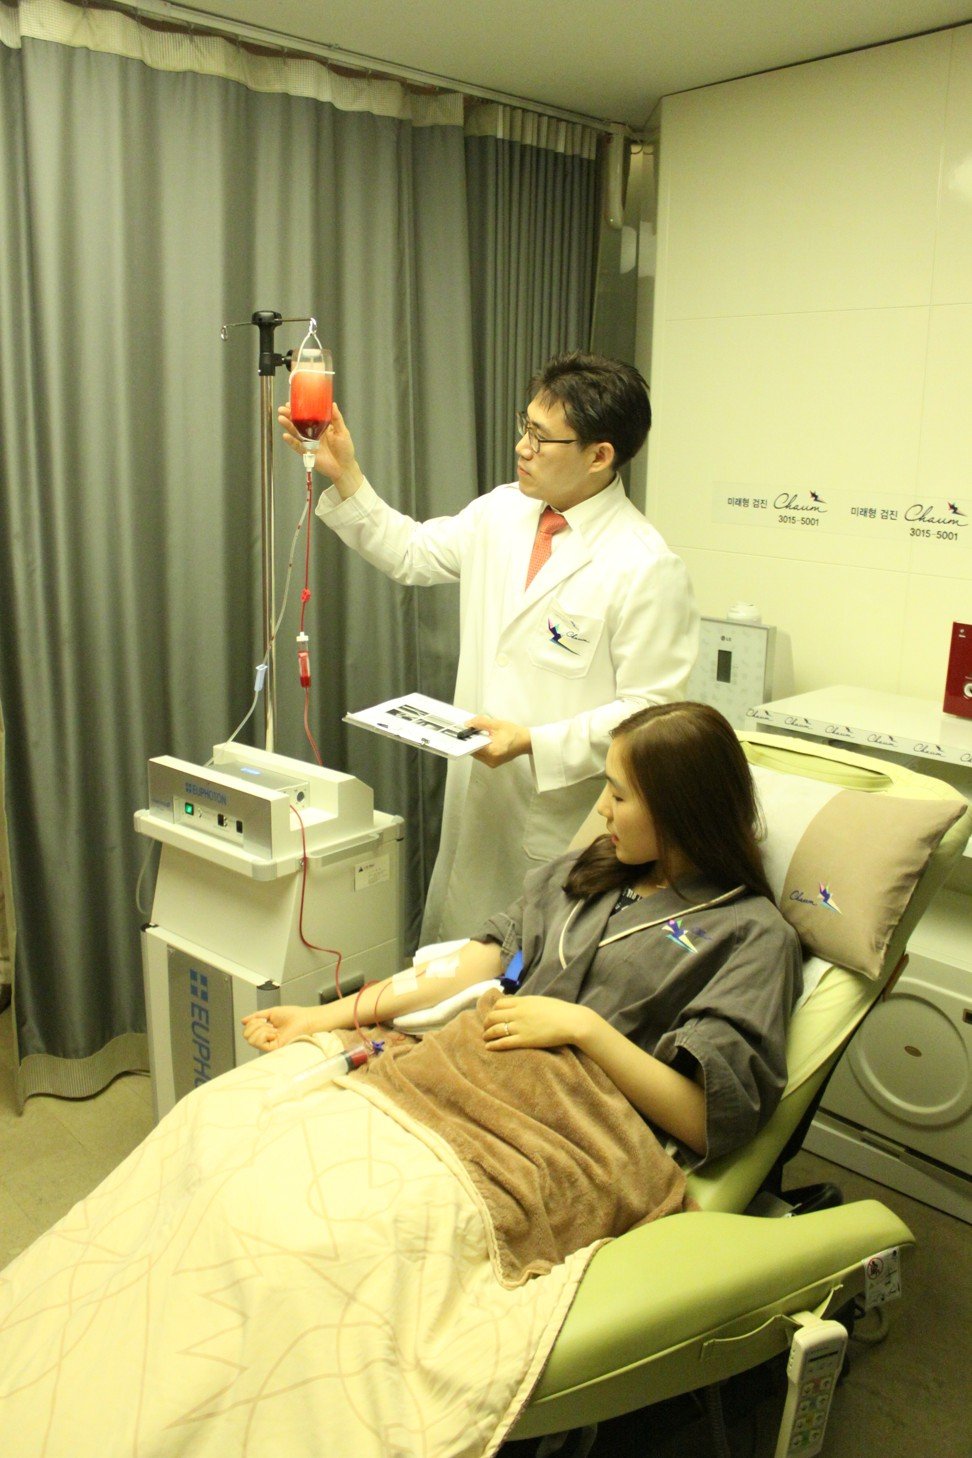 Blood irradiation therapy at Chaum.